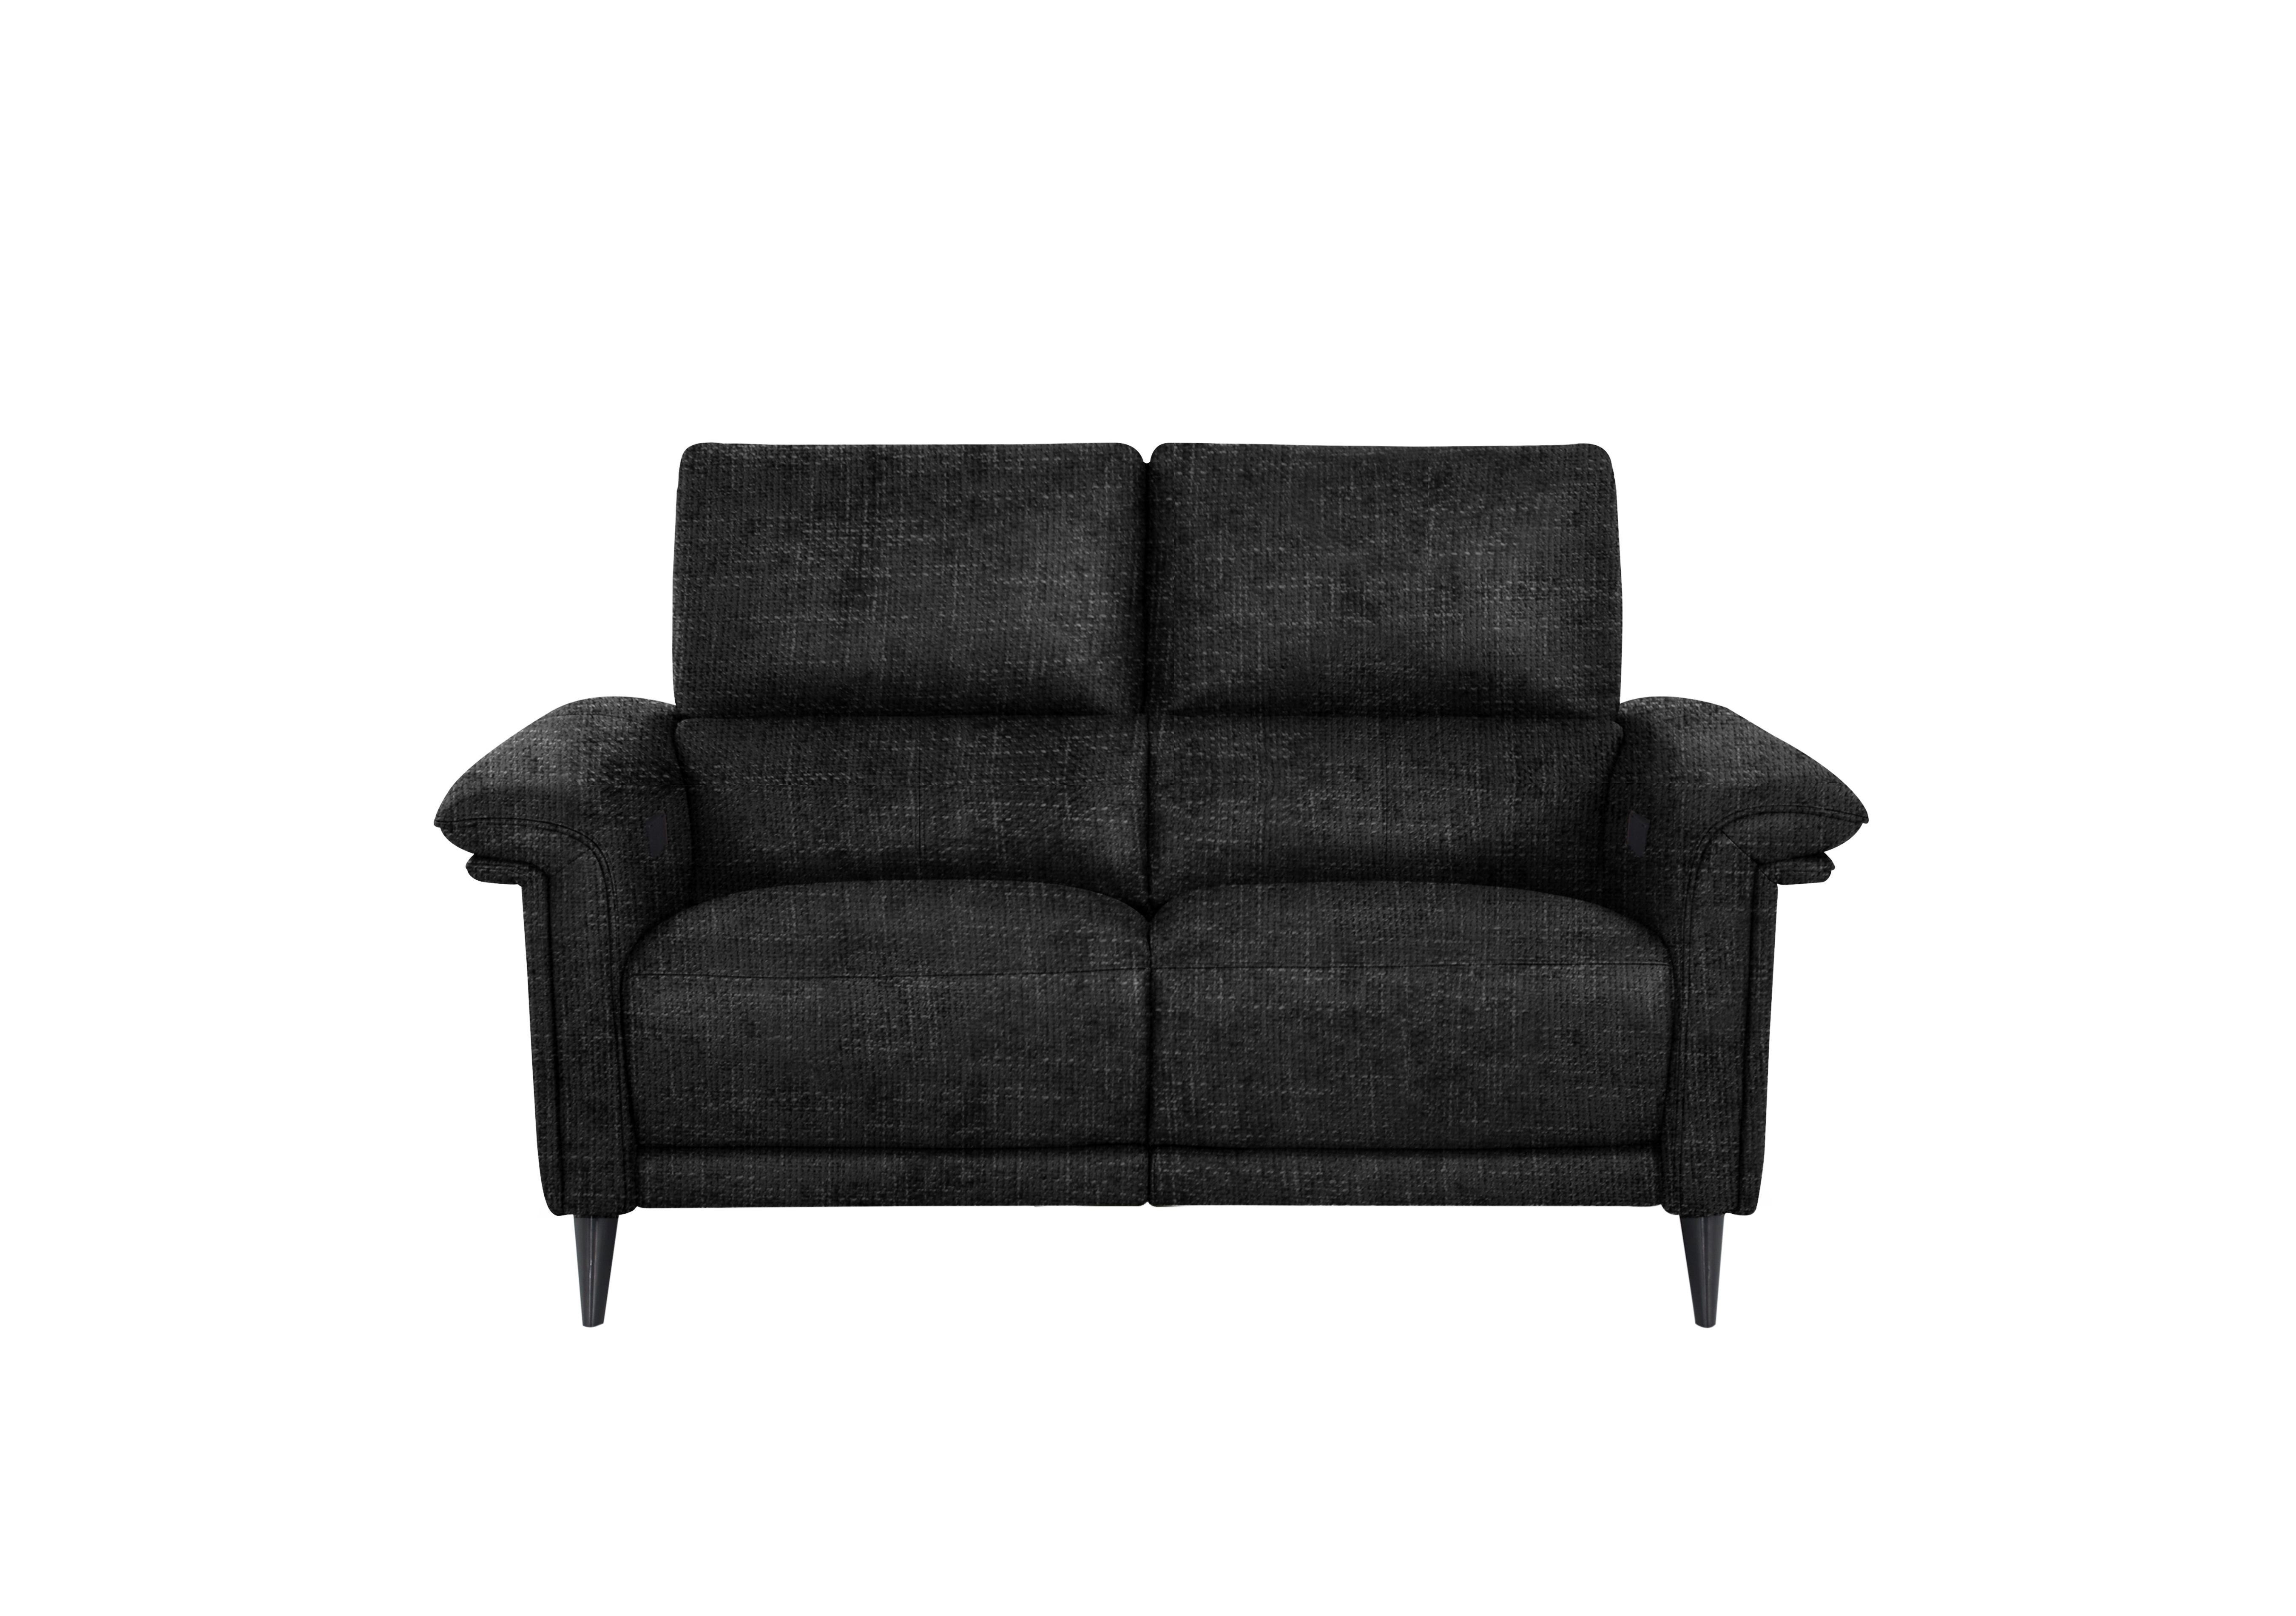 Huxley 2 Seater Fabric Sofa in Fab-Cac-R463 Black Mica on Furniture Village